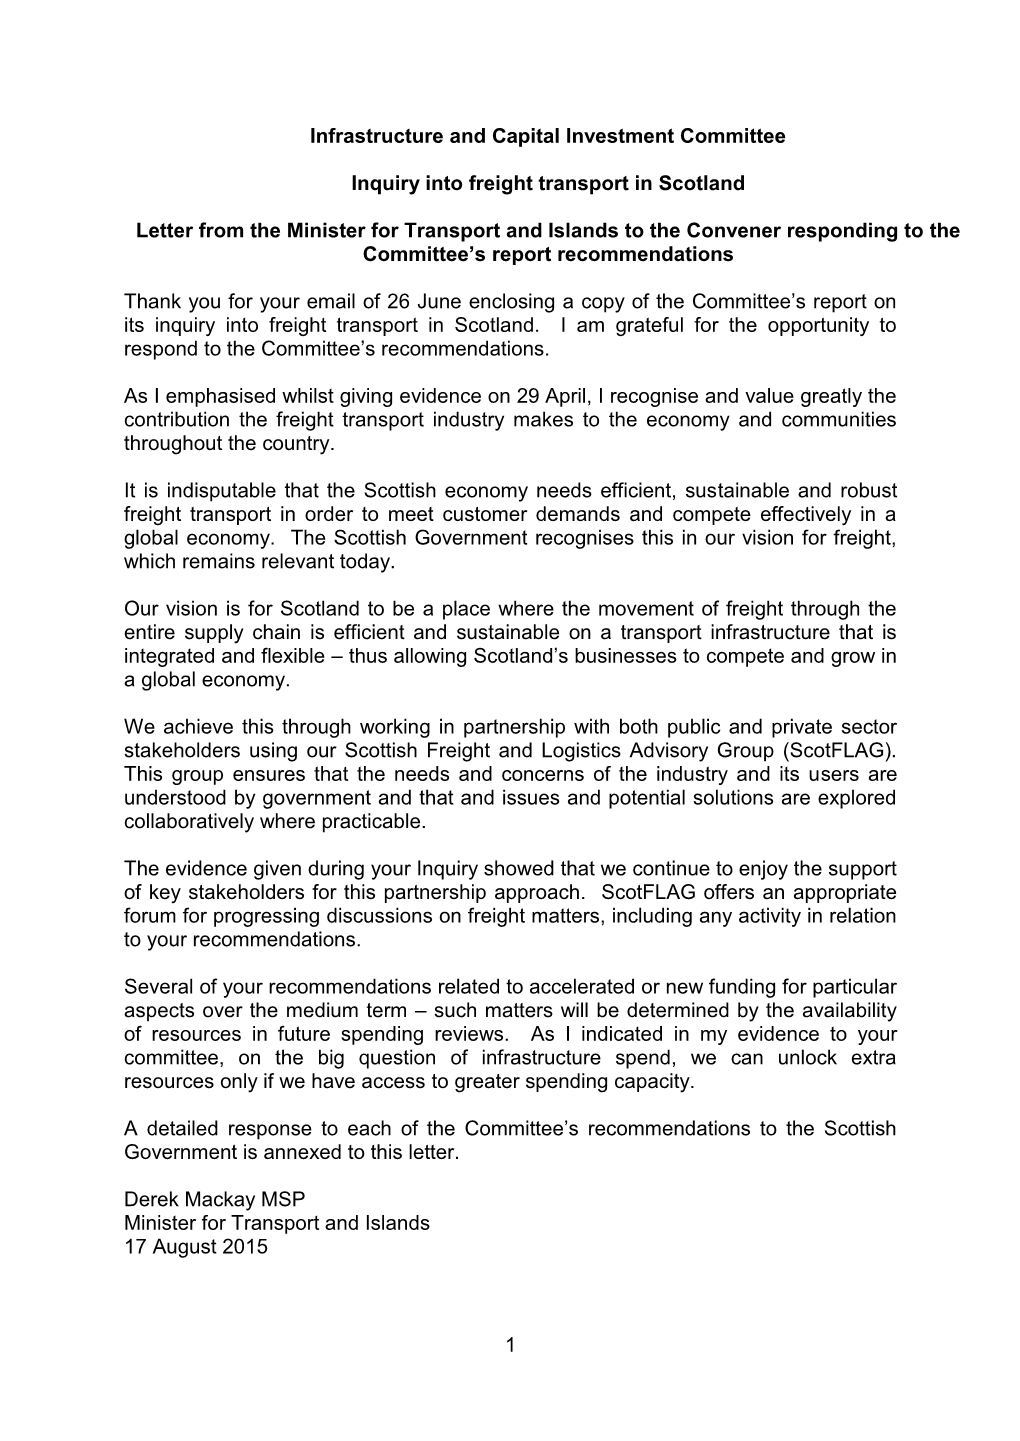 Response to Each of the Committee’S Recommendations to the Scottish Government Is Annexed to This Letter